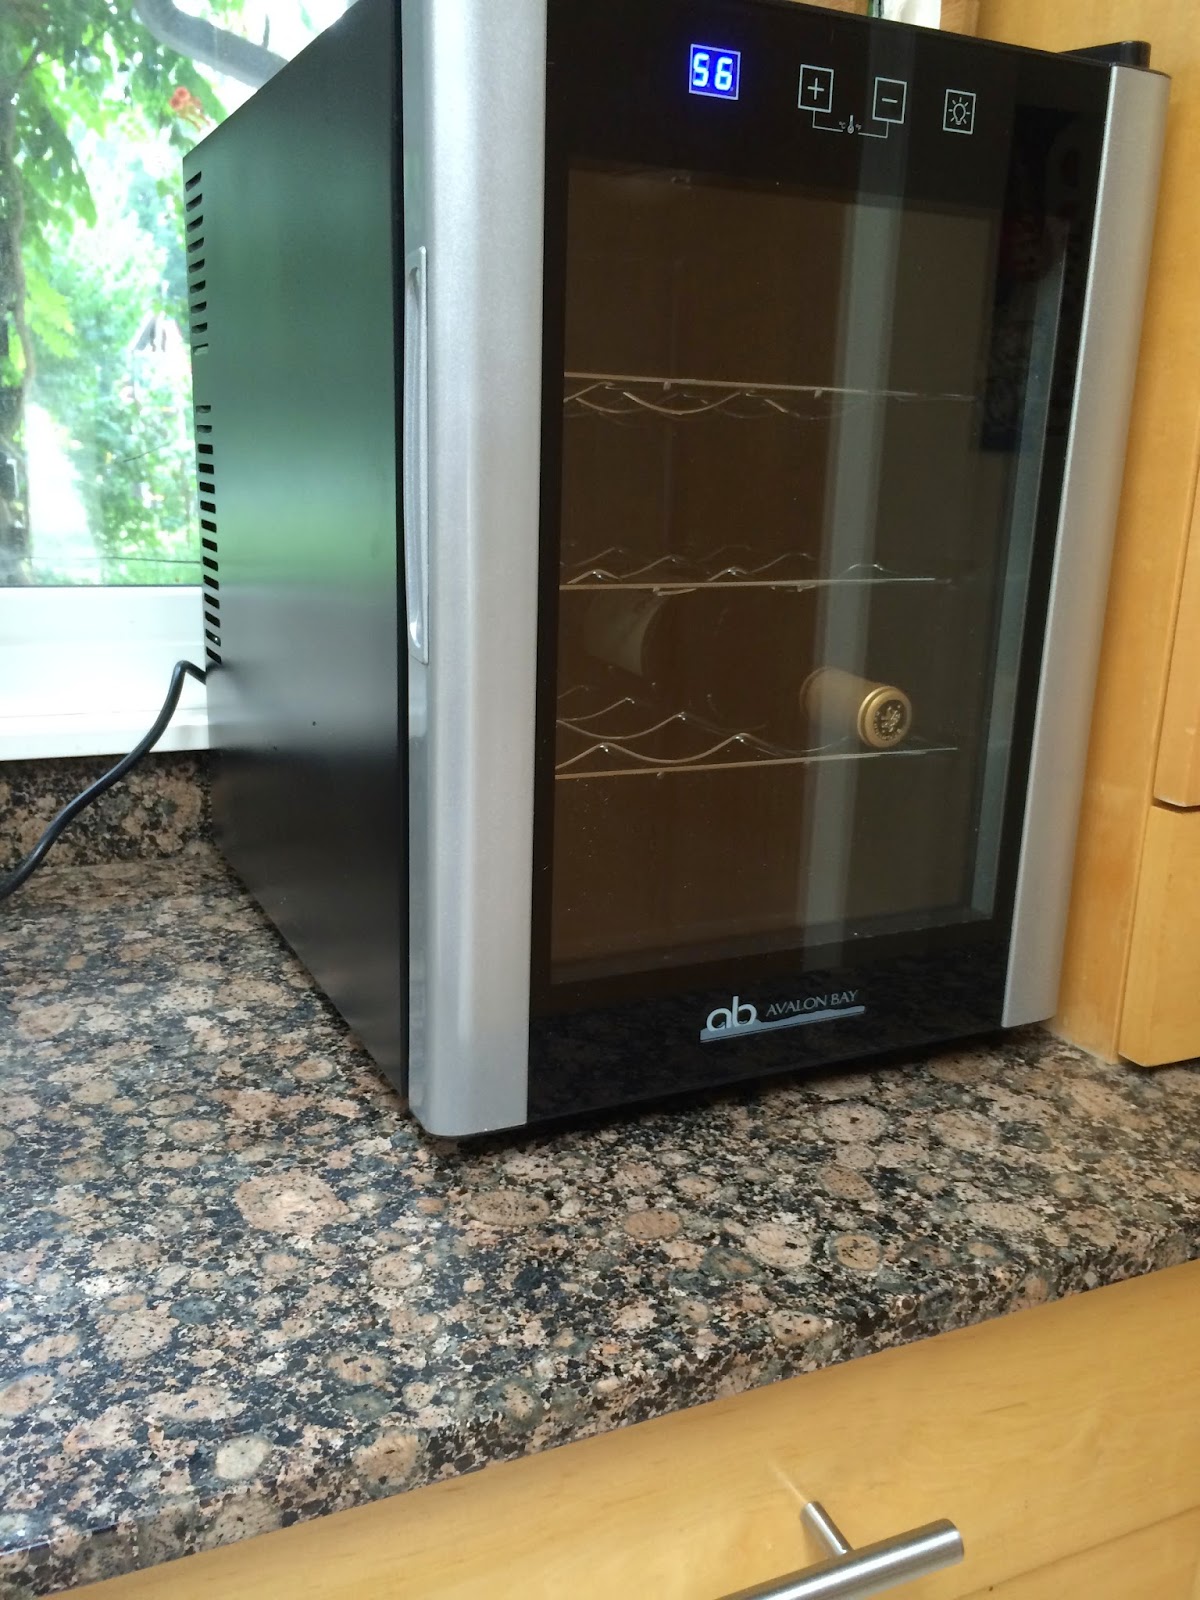 superdumb supervillain: Avalon Bay AB-WINE12S Wine Cooler Review